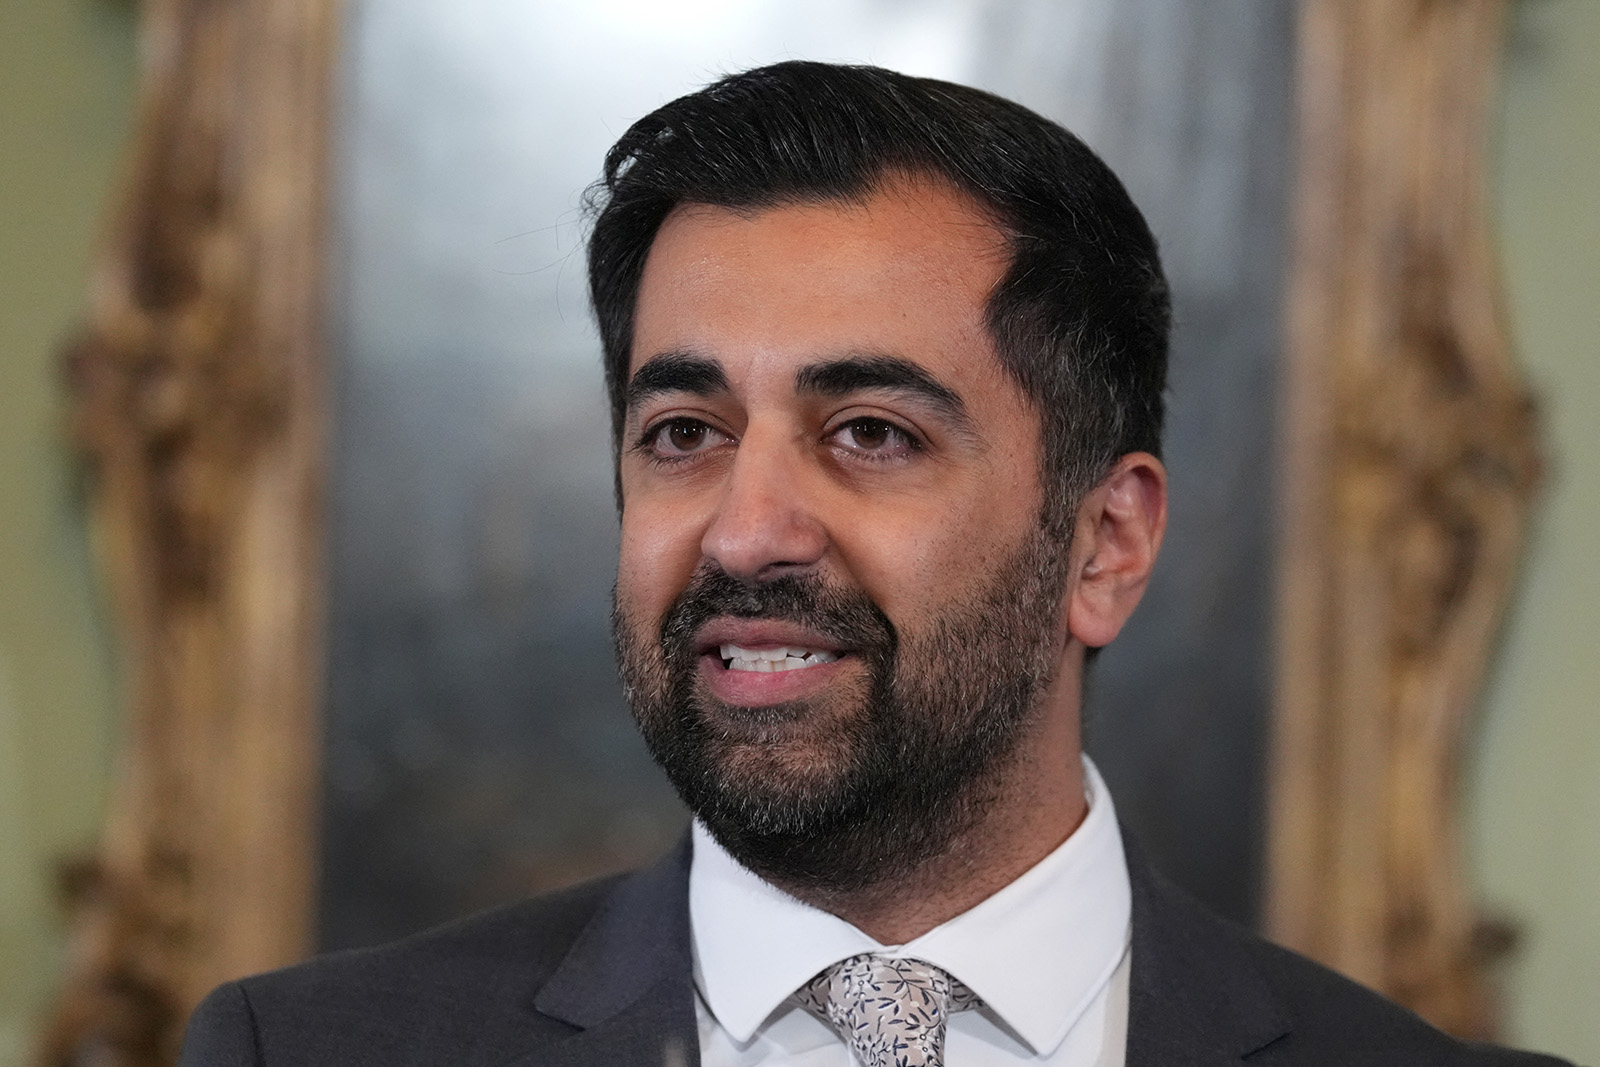 Scotland's First Minister Humza Yousaf speaks during a press conference at Bute House, his official residence where he said he will resign as SNP leader and Scotland's First Minister, avoiding having to face a no-confidence vote in his leadership, in Edinburgh, Britain, April 29, 2024